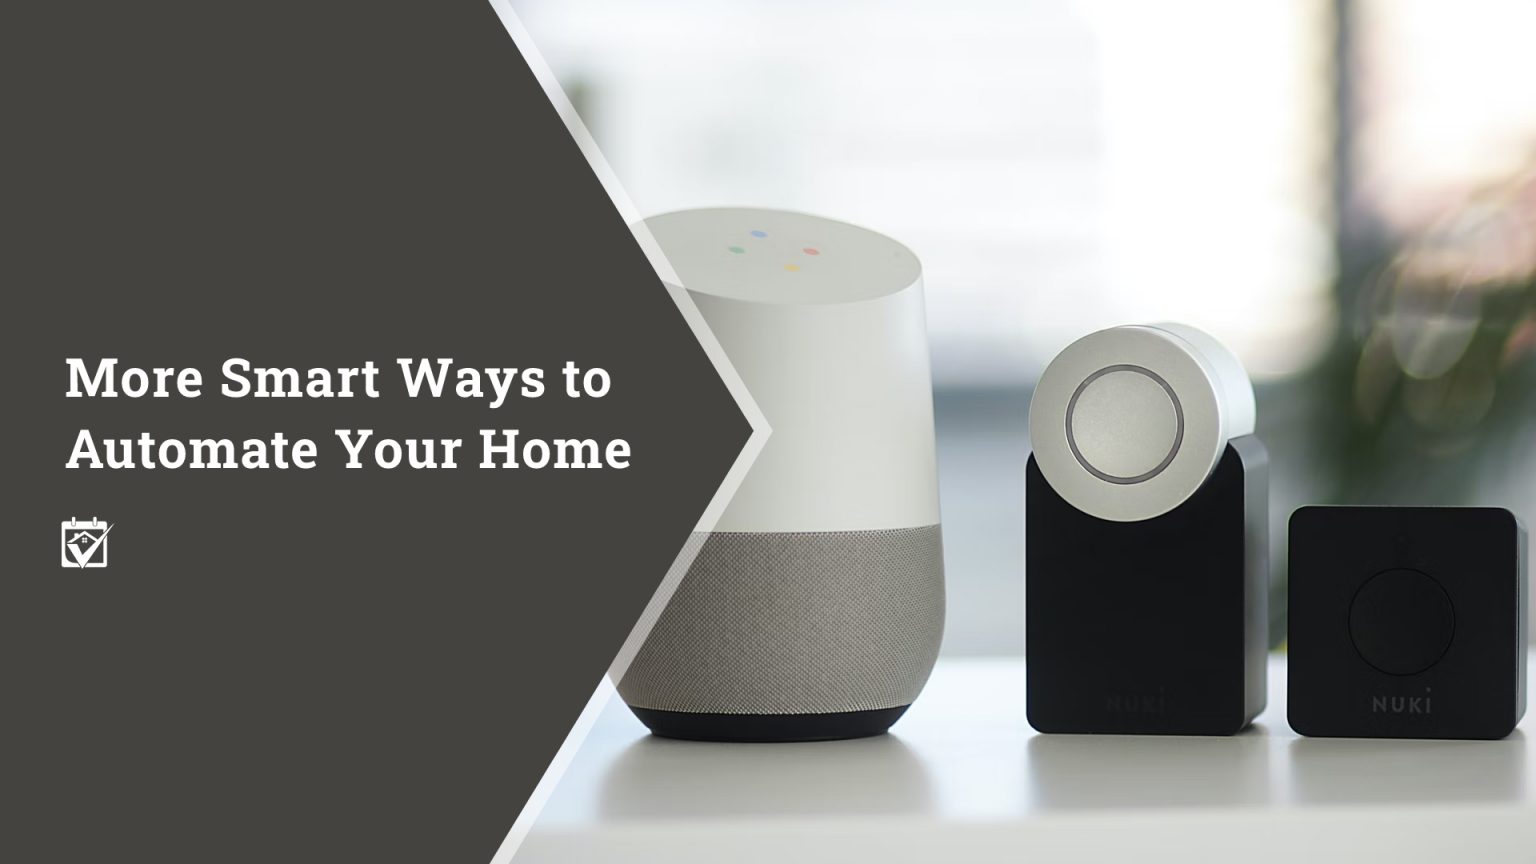 More Smart Ways to Automate Your Home